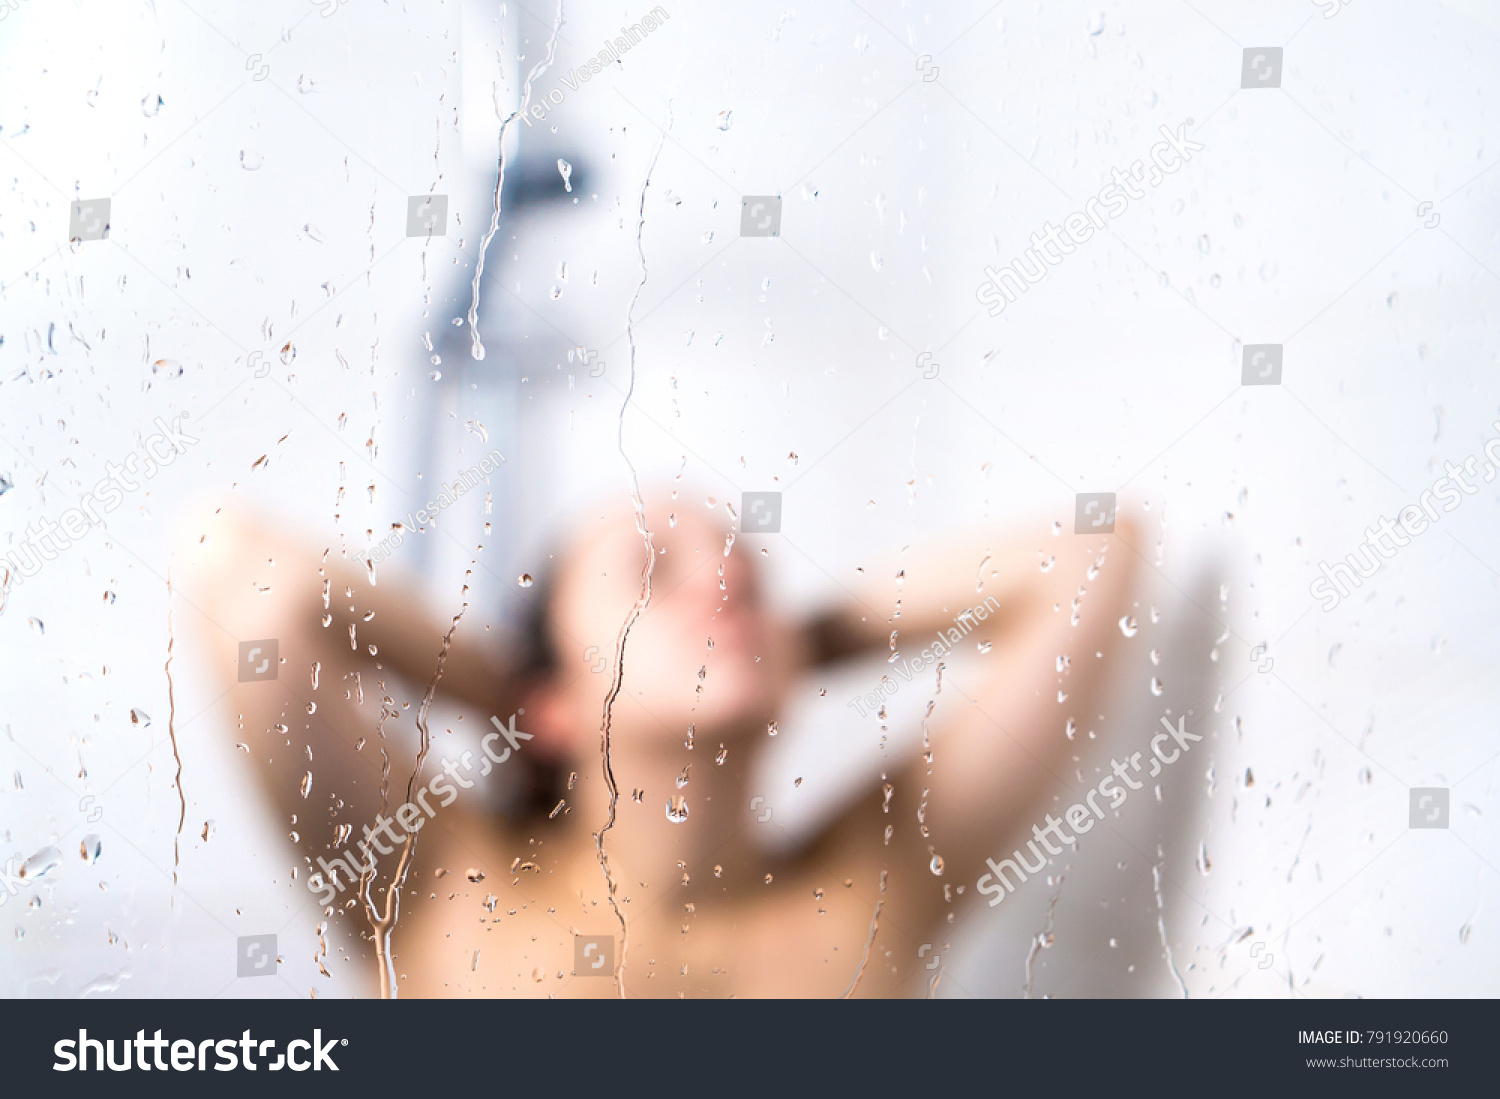 Young beautiful woman in shower. Behind wet glass window with water drops. Focus on droplets. Girl bathing, washing hair and taking fresh bath. #791920660